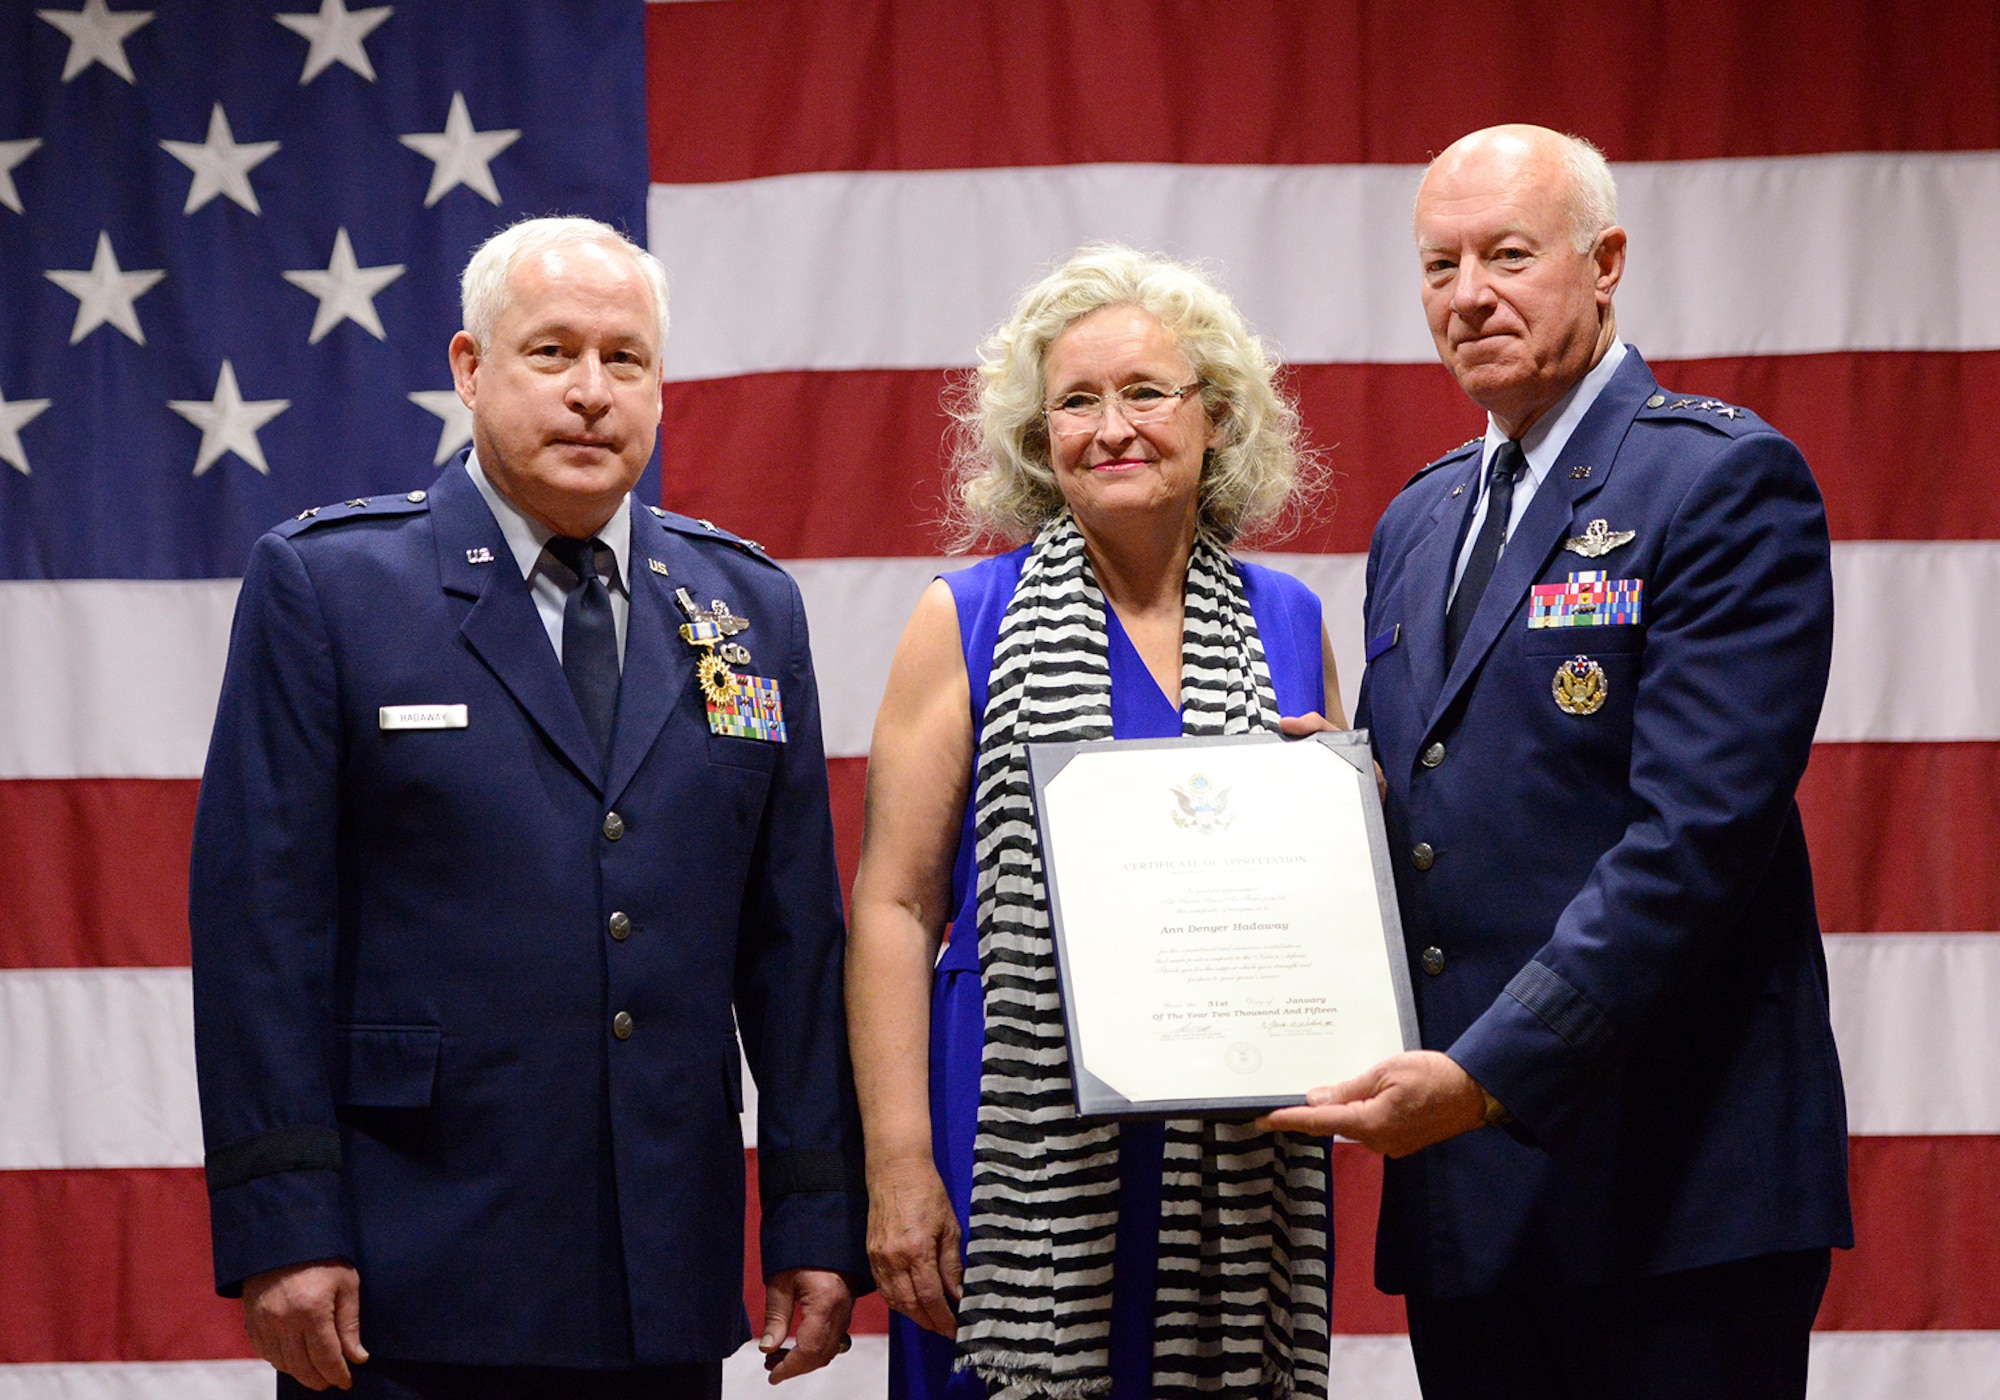 Mrs. Ann Hadaway receives a certificate of appreciation from former Director of the Air National Guard Lt. Gen. Harry M. Wyatt III (ret.) for her years of support for her husband, Maj. Gen William S. Hadaway III, former Director of Logistics, National Guard Bureau, during his retirement ceremony, April 11, at the Brig. Gen. Joseph W. Turner complex, Tulsa Air National Guard Base, Okla.  Both Wyatt and Hadaway were former wing commanders at the 138th Fighter Wing in Tulsa.  (U.S. National Guard photo by Master Sgt. Mark A. Moore/Released)